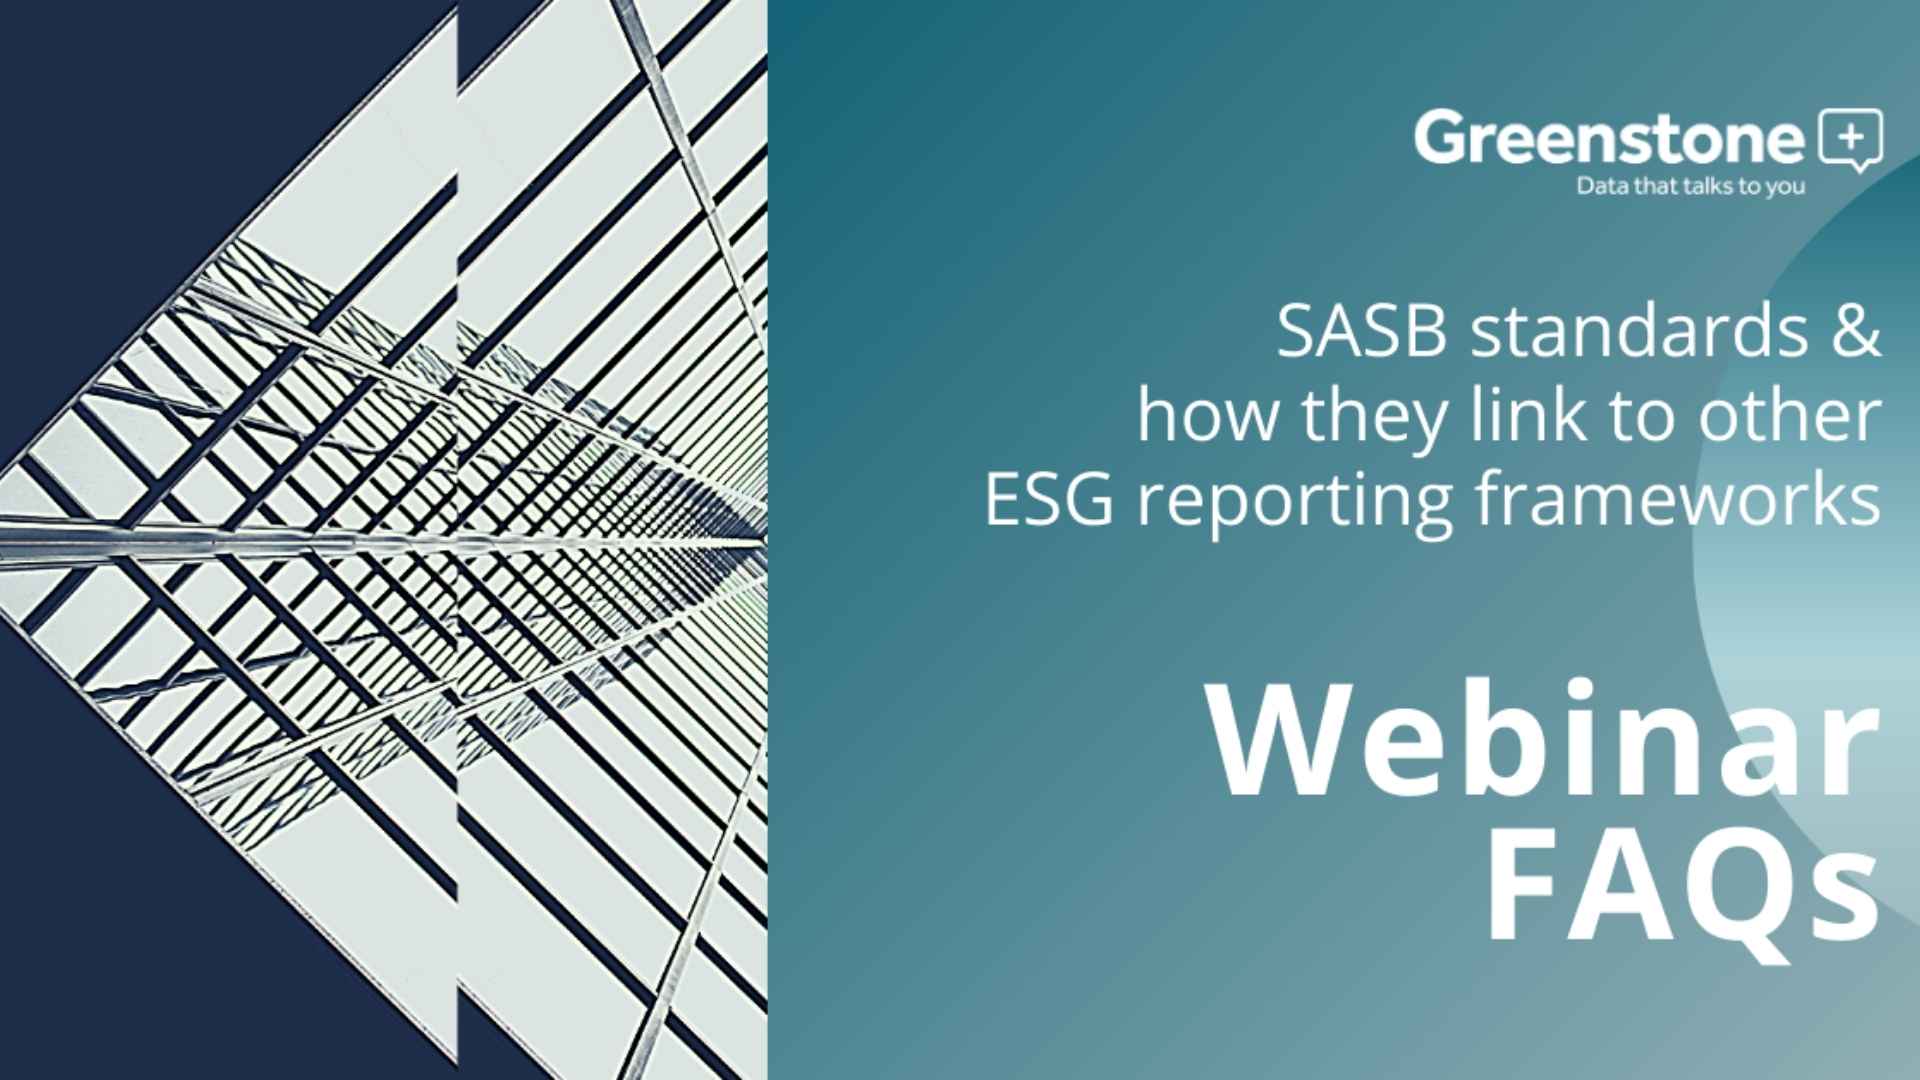 SASB standards & how they link to other ESG reporting frameworks -FAQs